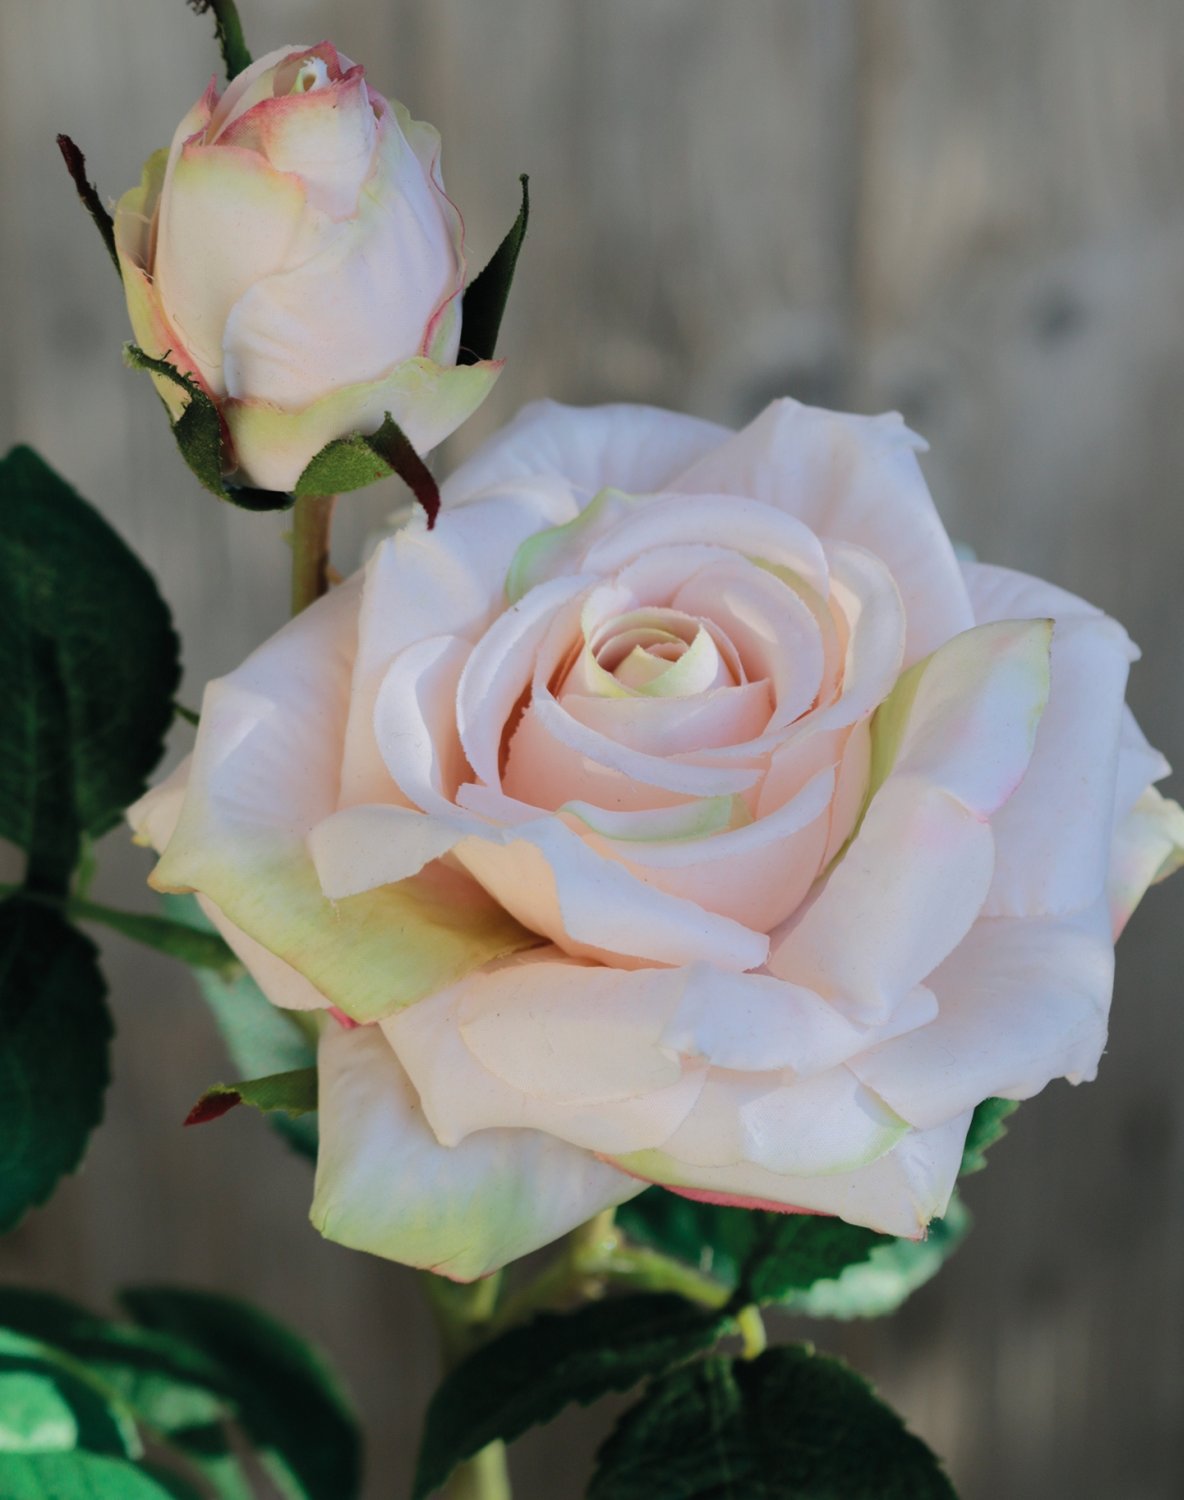 Artificial rose, 1 flower, 1 bud, 37 cm, real touch soft, antique-light pink